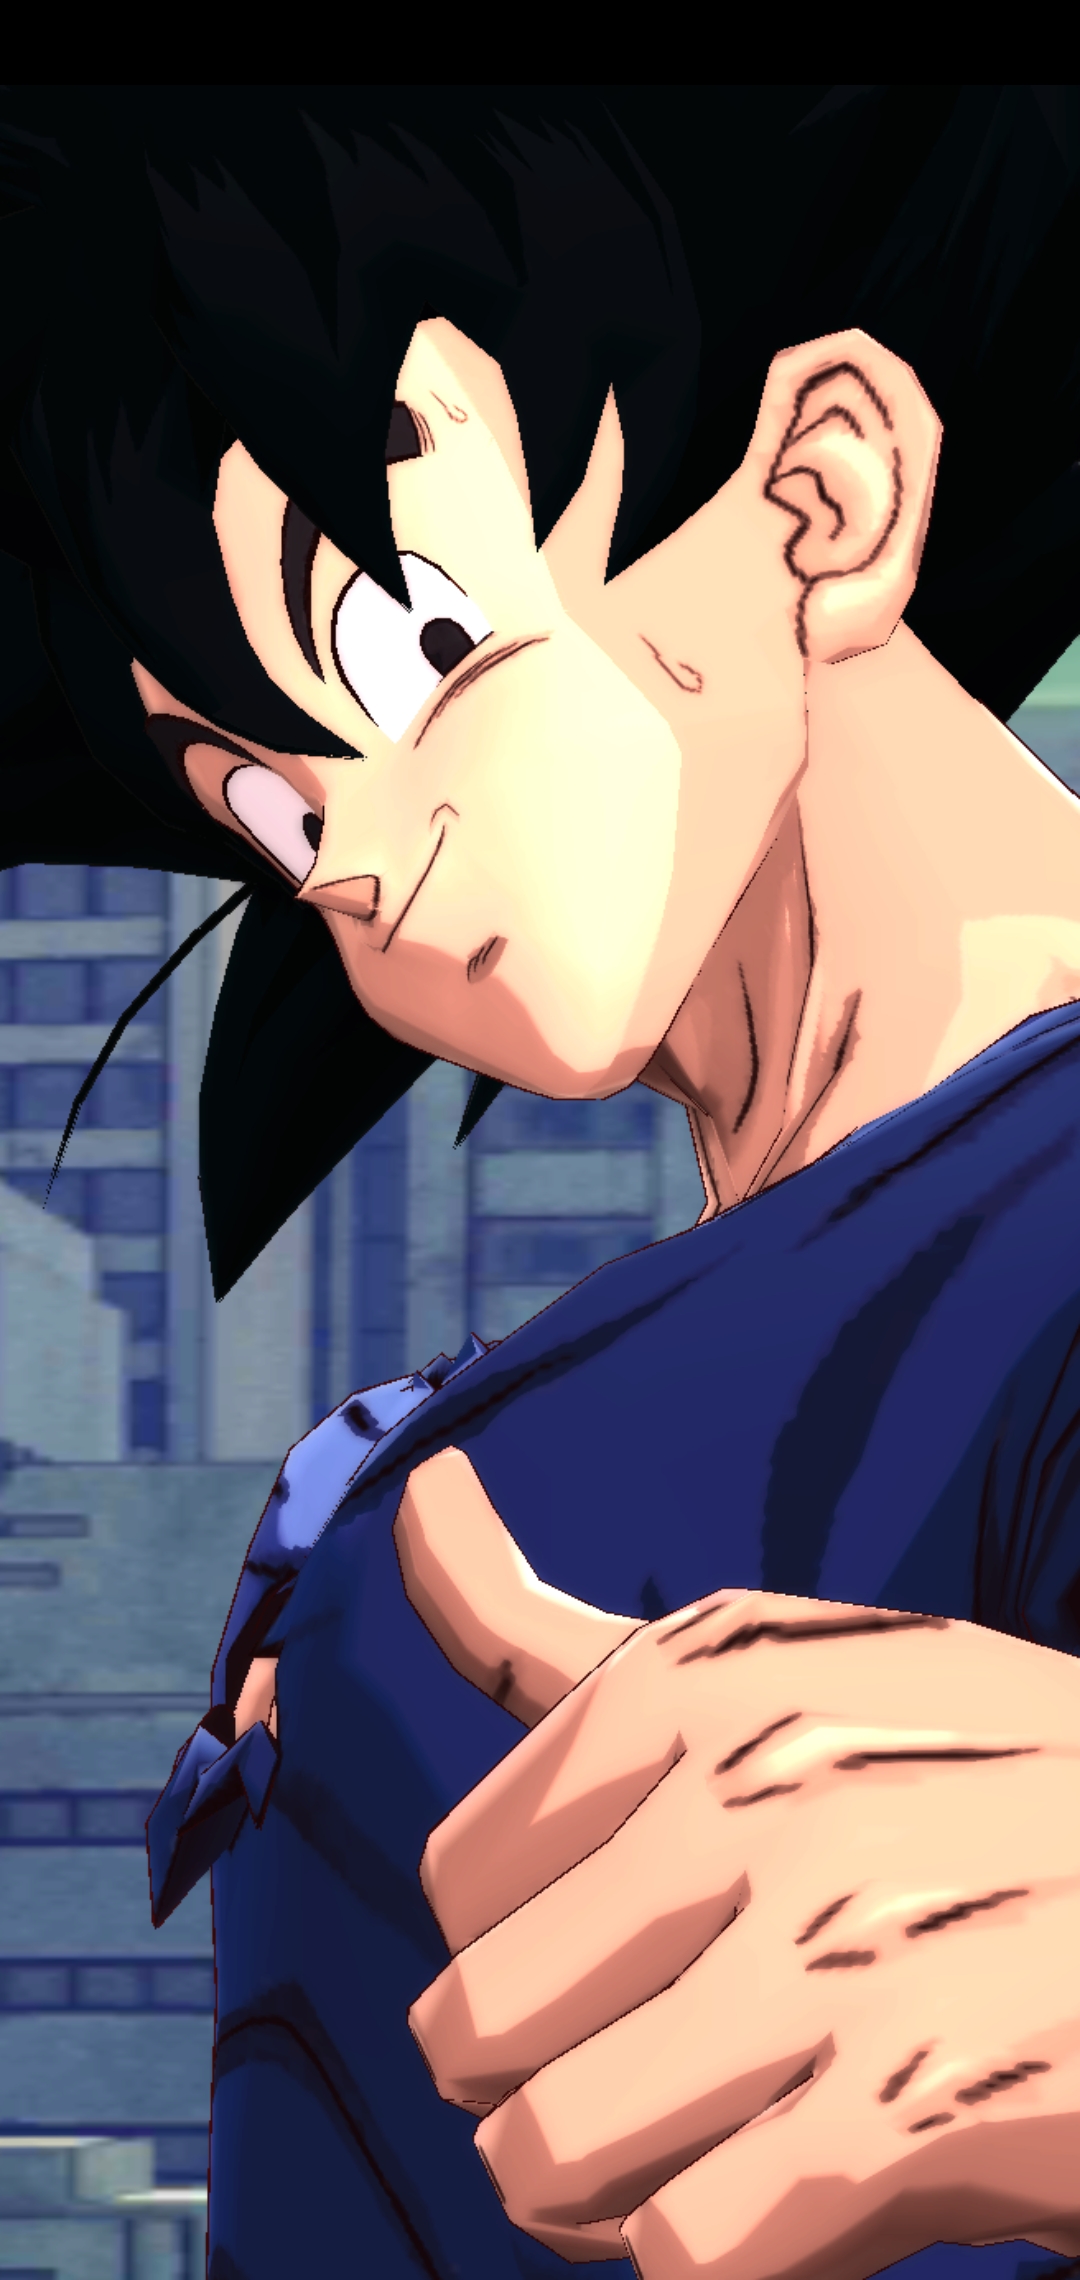 Goku after kid buu fight wallpaper for note 10 +. Enjoy! I also can do other ones if you guys wish: DragonballLegends